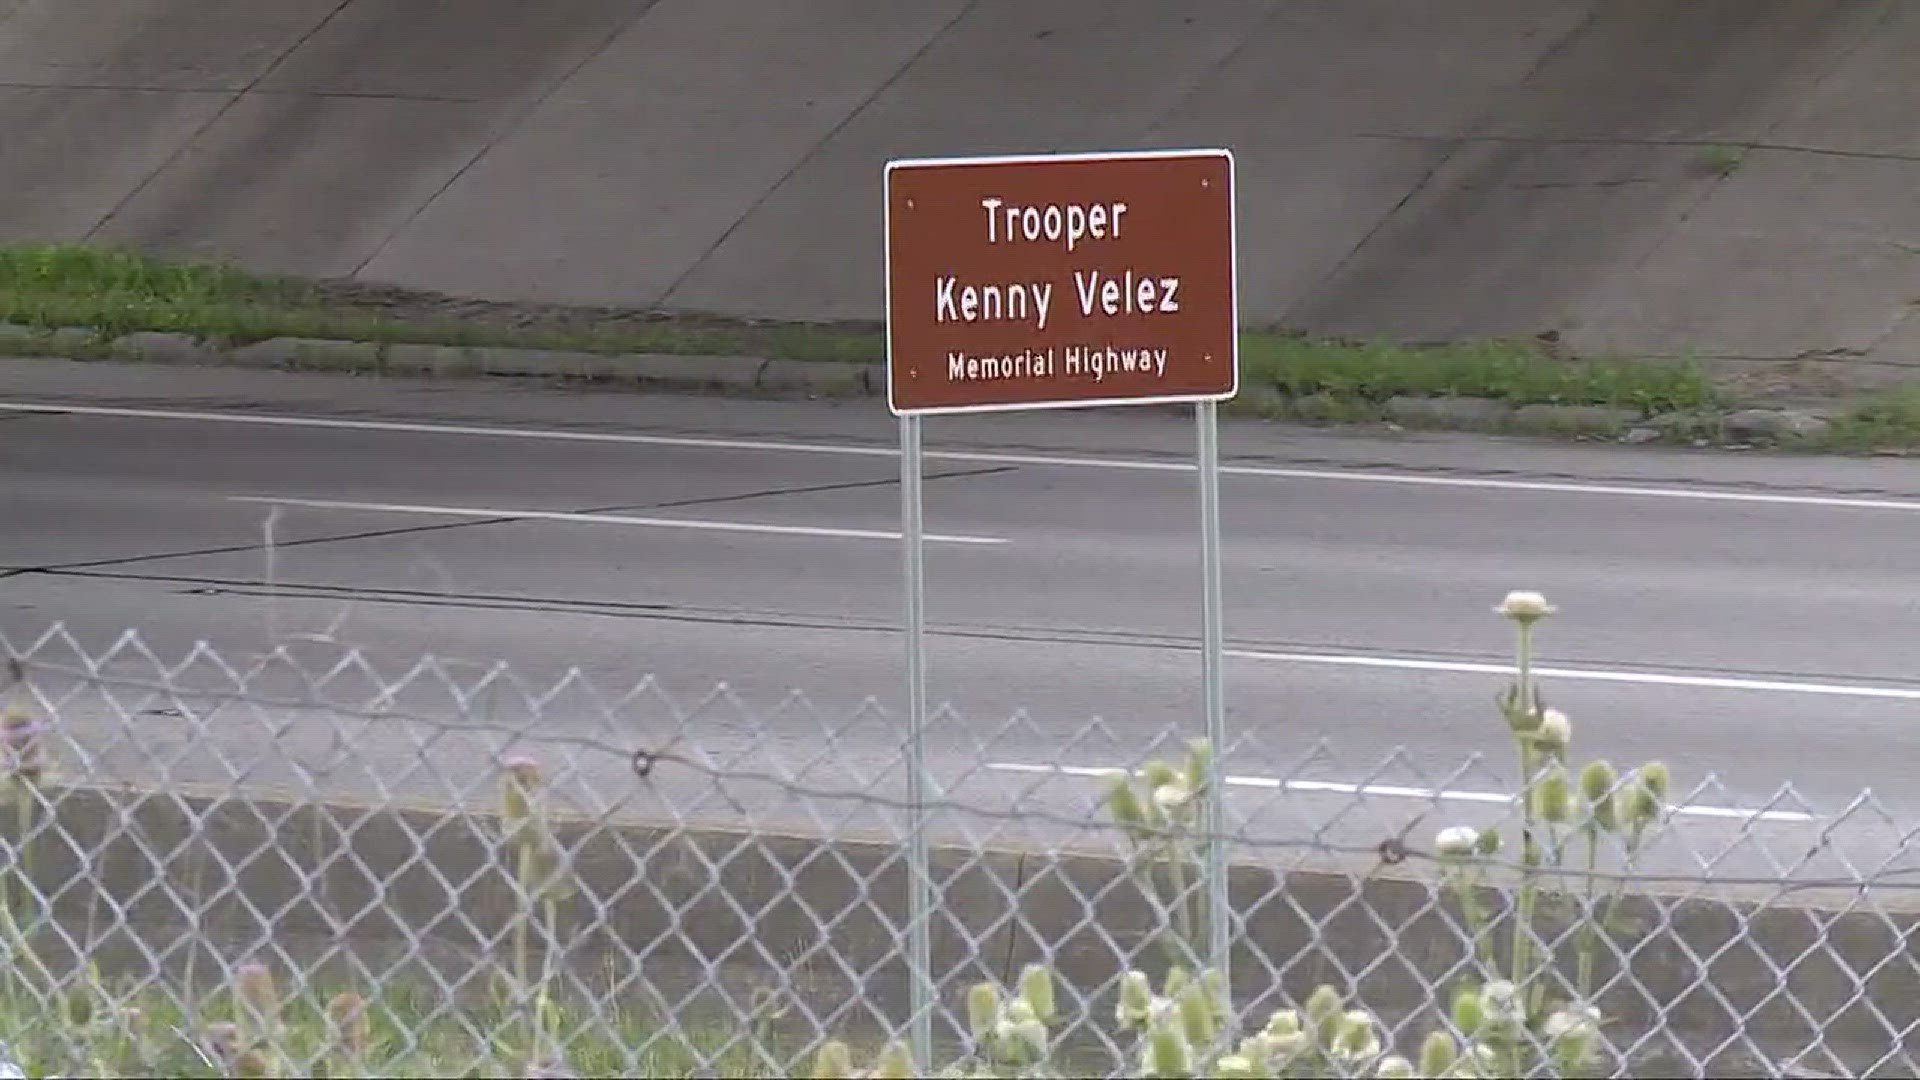 I-90 will now honor two troopers